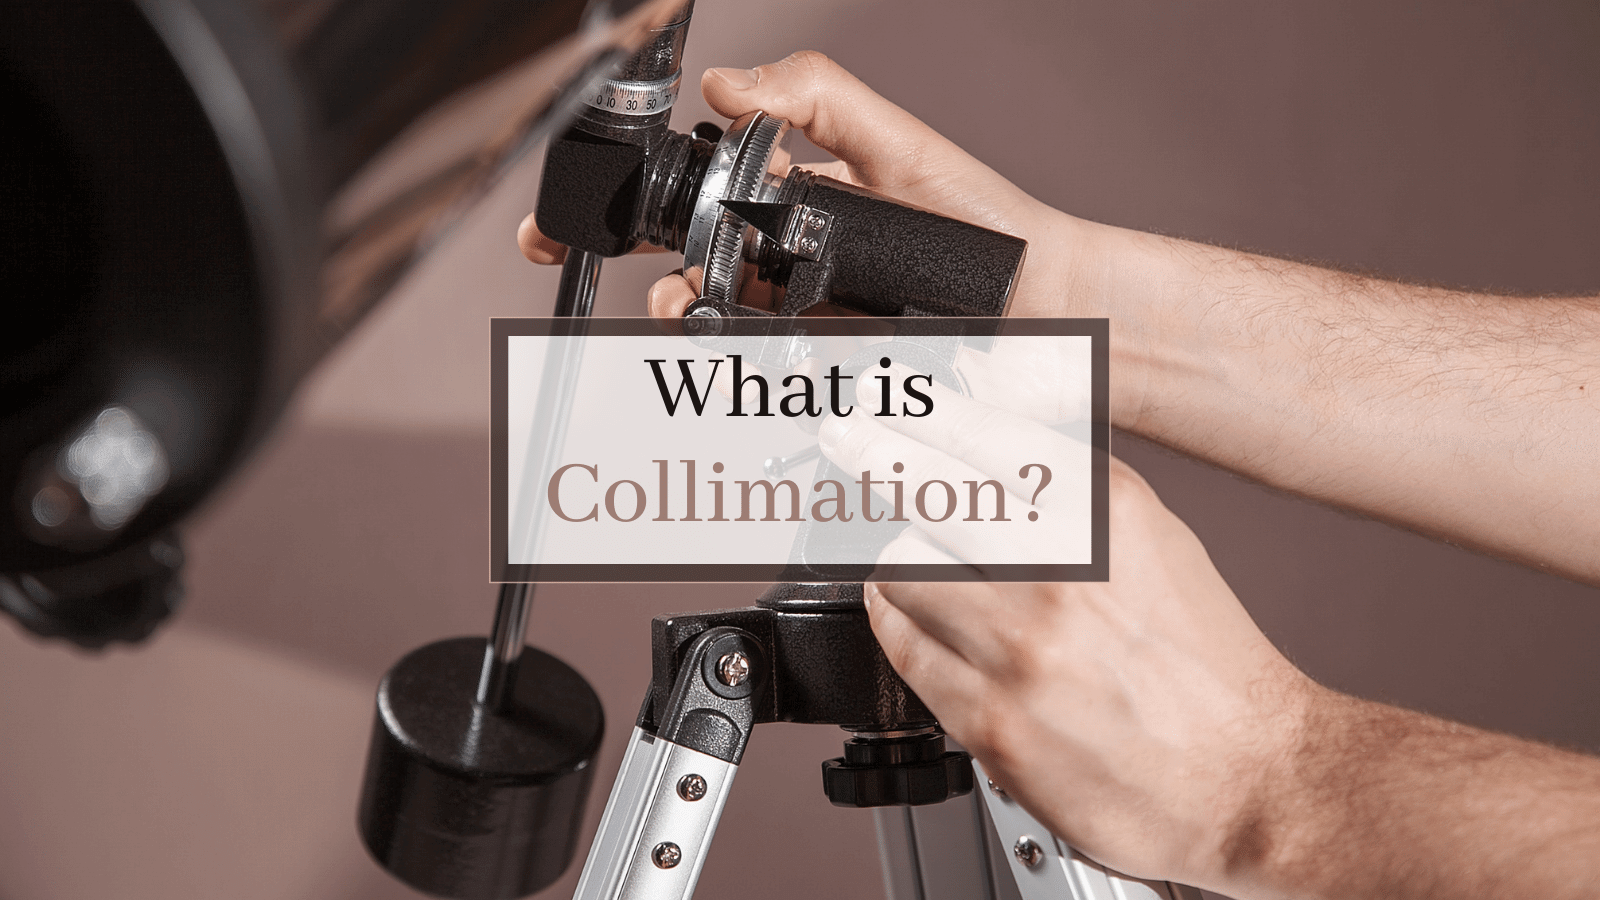 What is collimation?